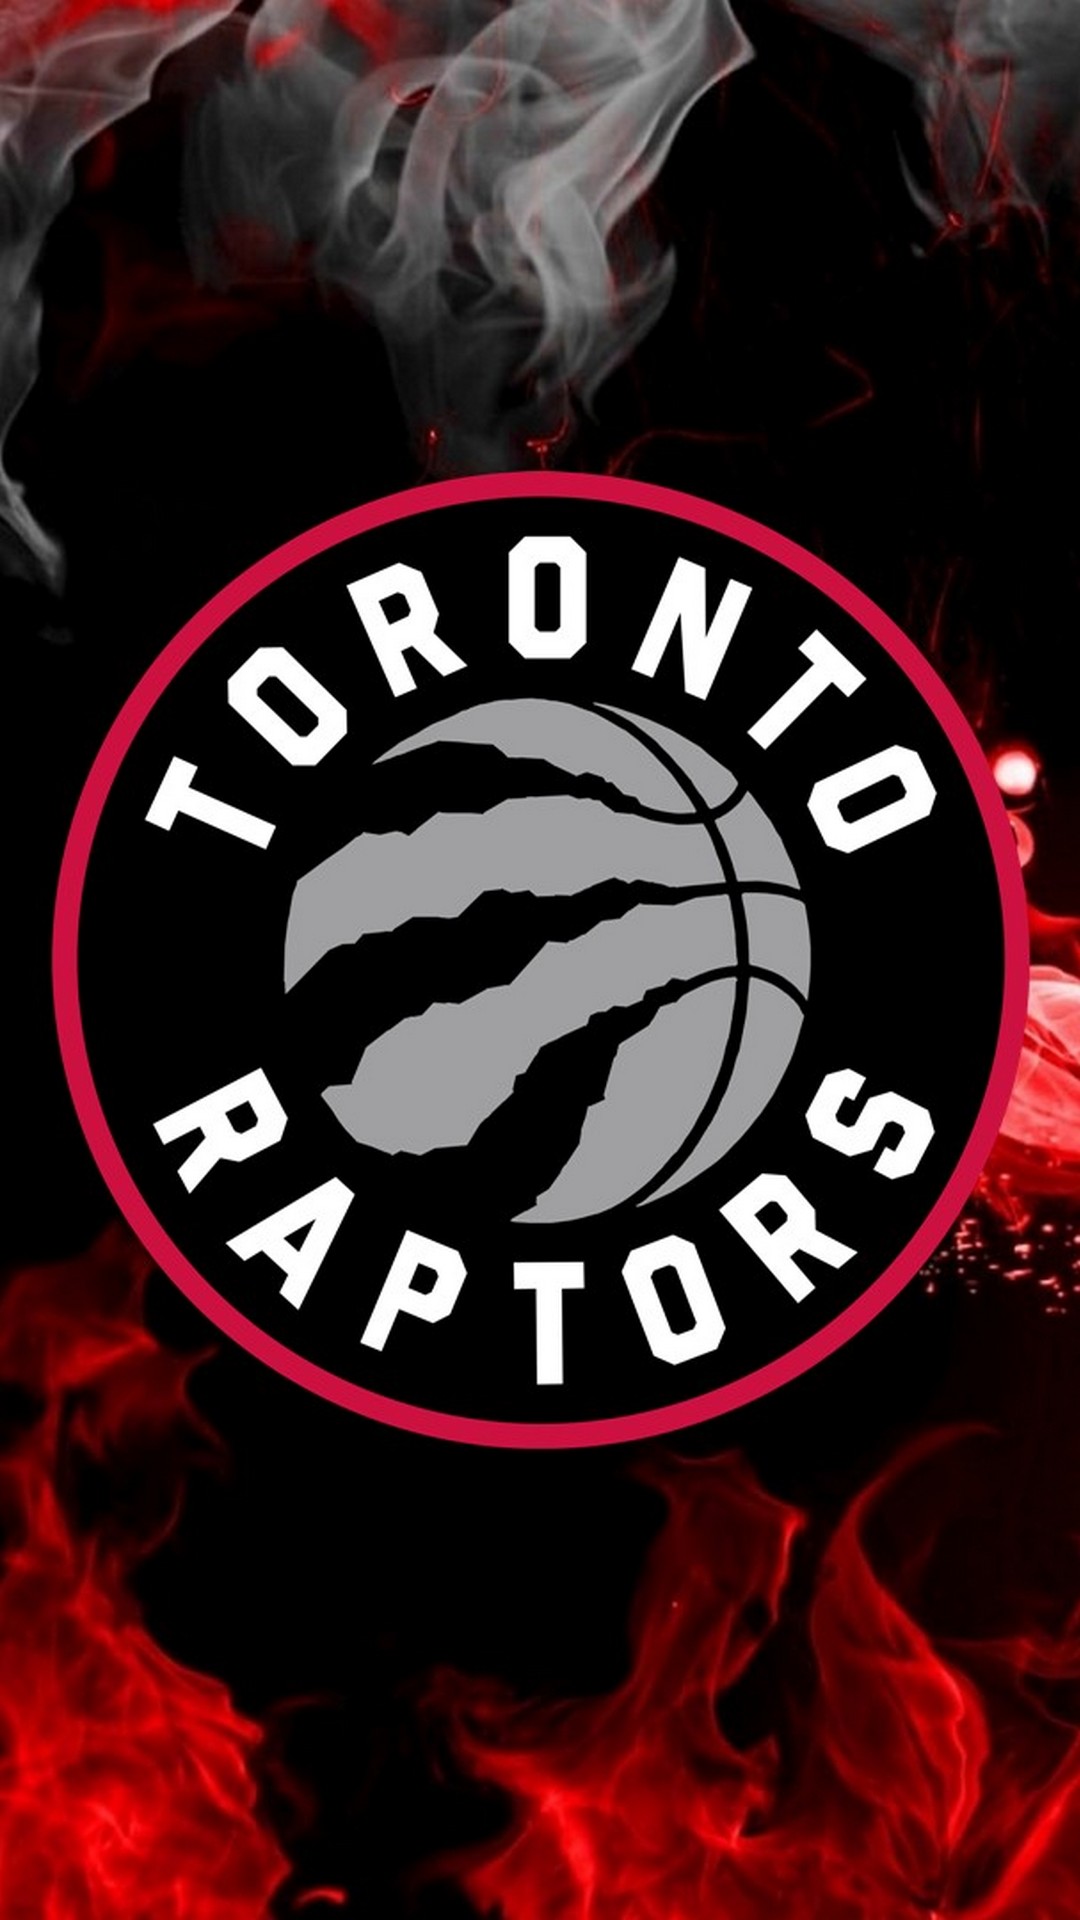 Toronto Raptors Wallpaper For iPhone with image resolution 1080x1920 pixel. You can make this wallpaper for your iPhone 5, 6, 7, 8, X backgrounds, Mobile Screensaver, or iPad Lock Screen